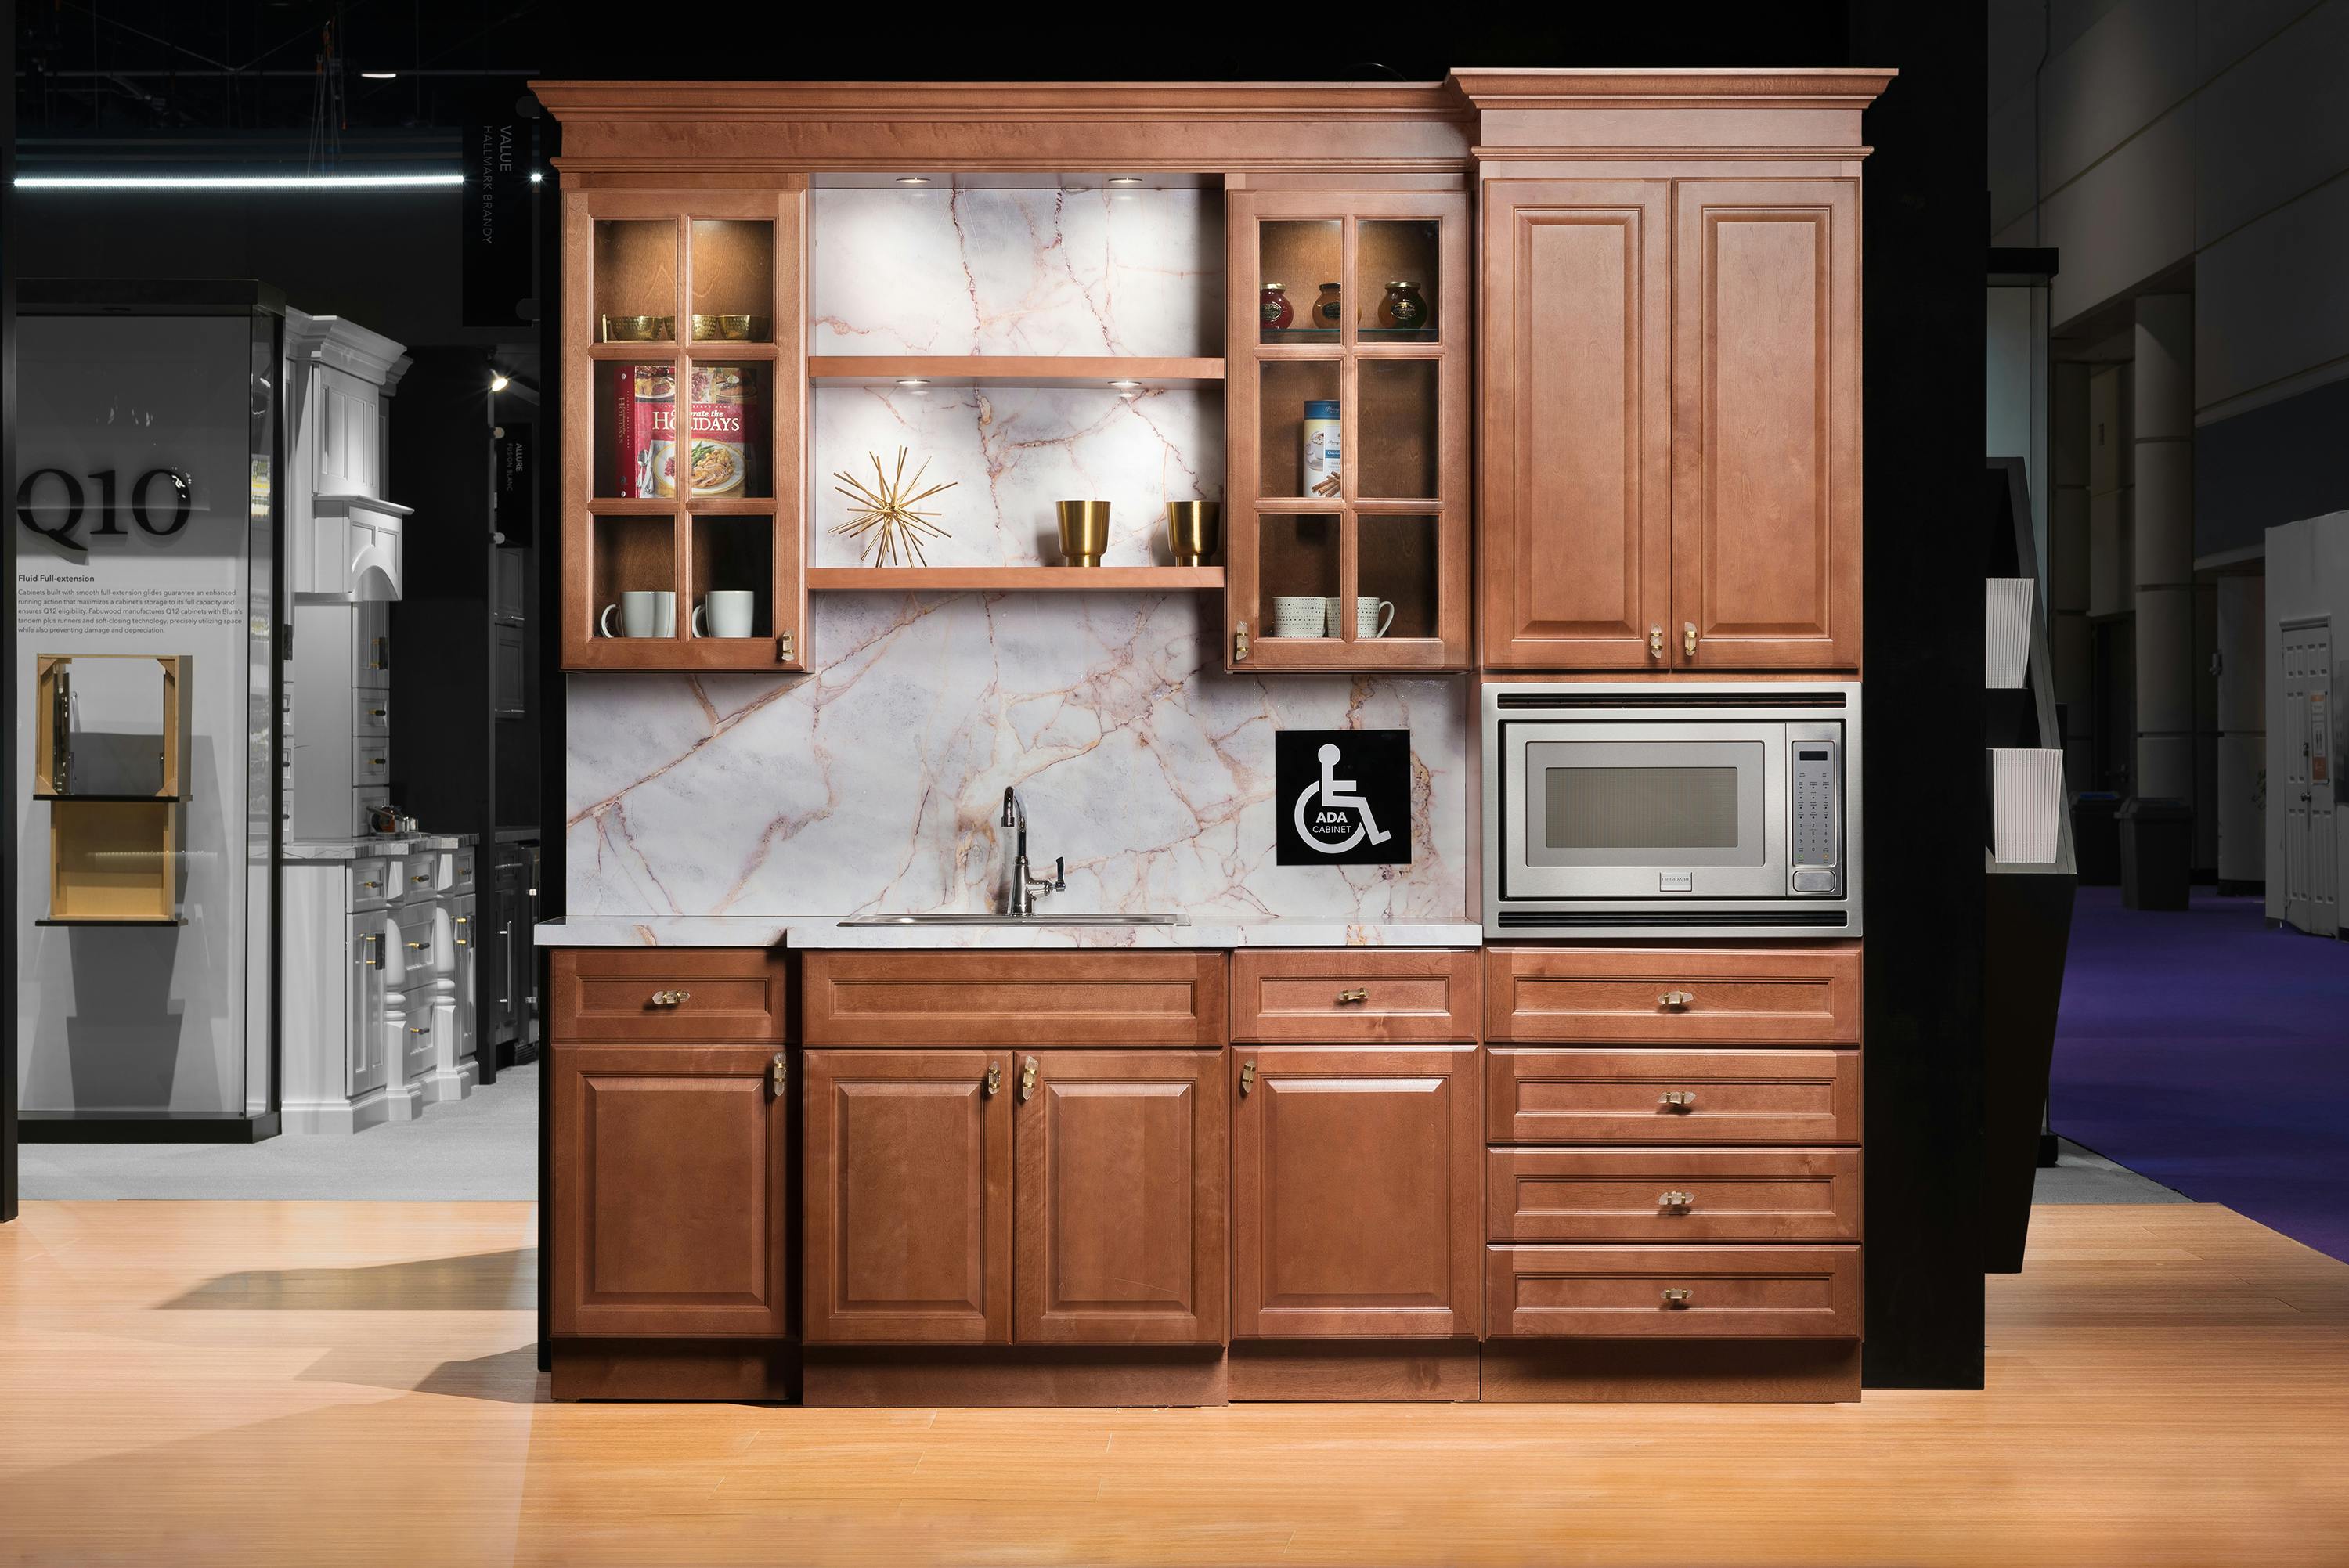 Kbis 2018 Fabuwood Cabinetry